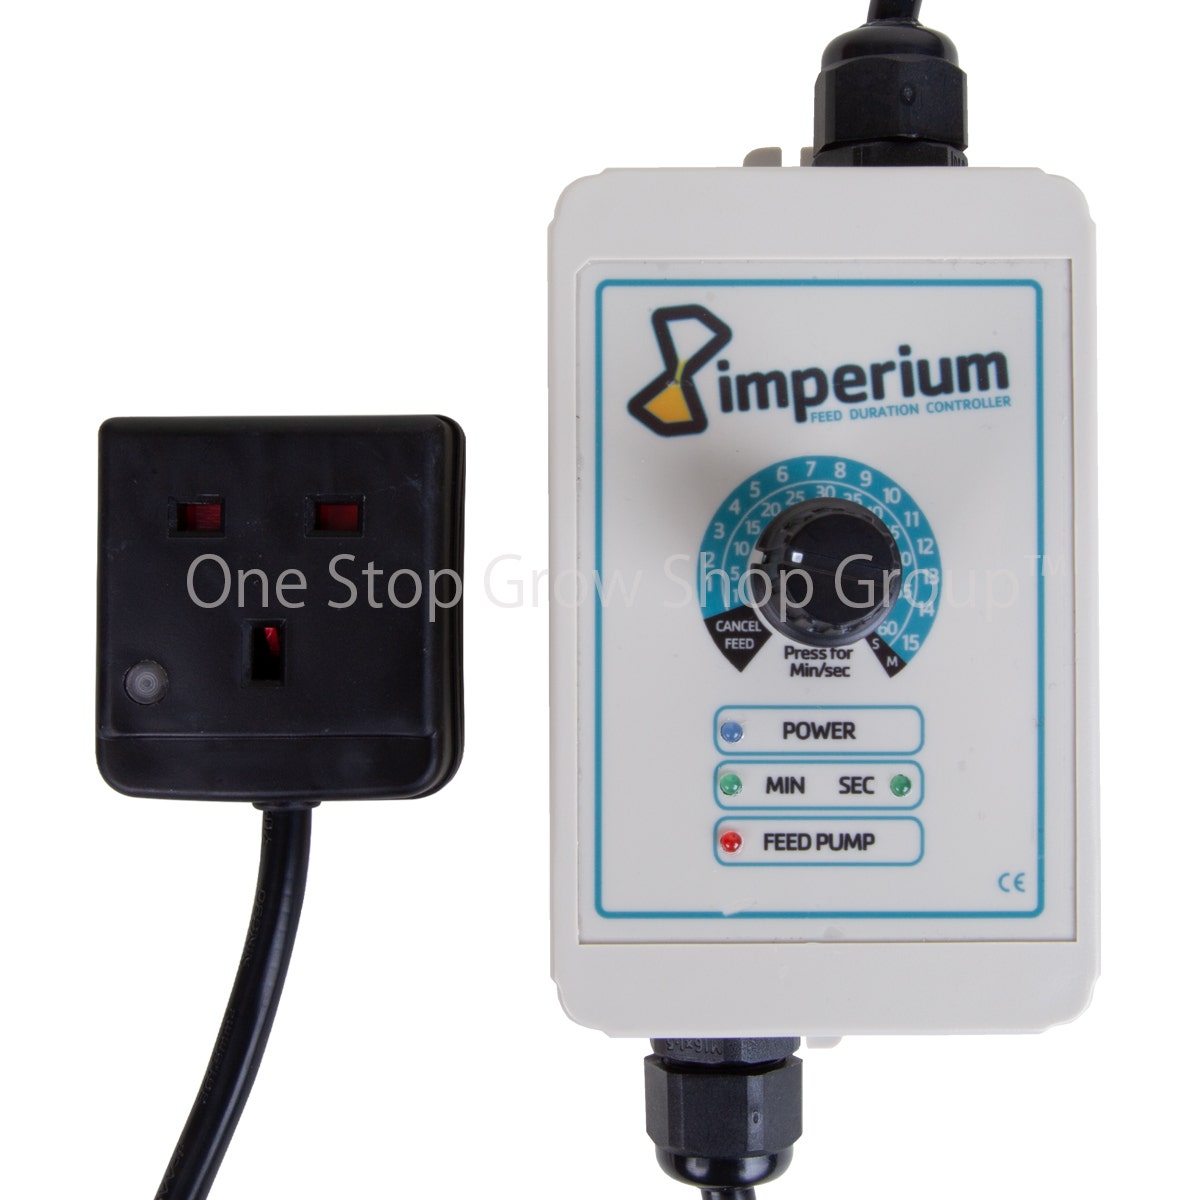 Imperium - Single Outlet Feed Duration Timer